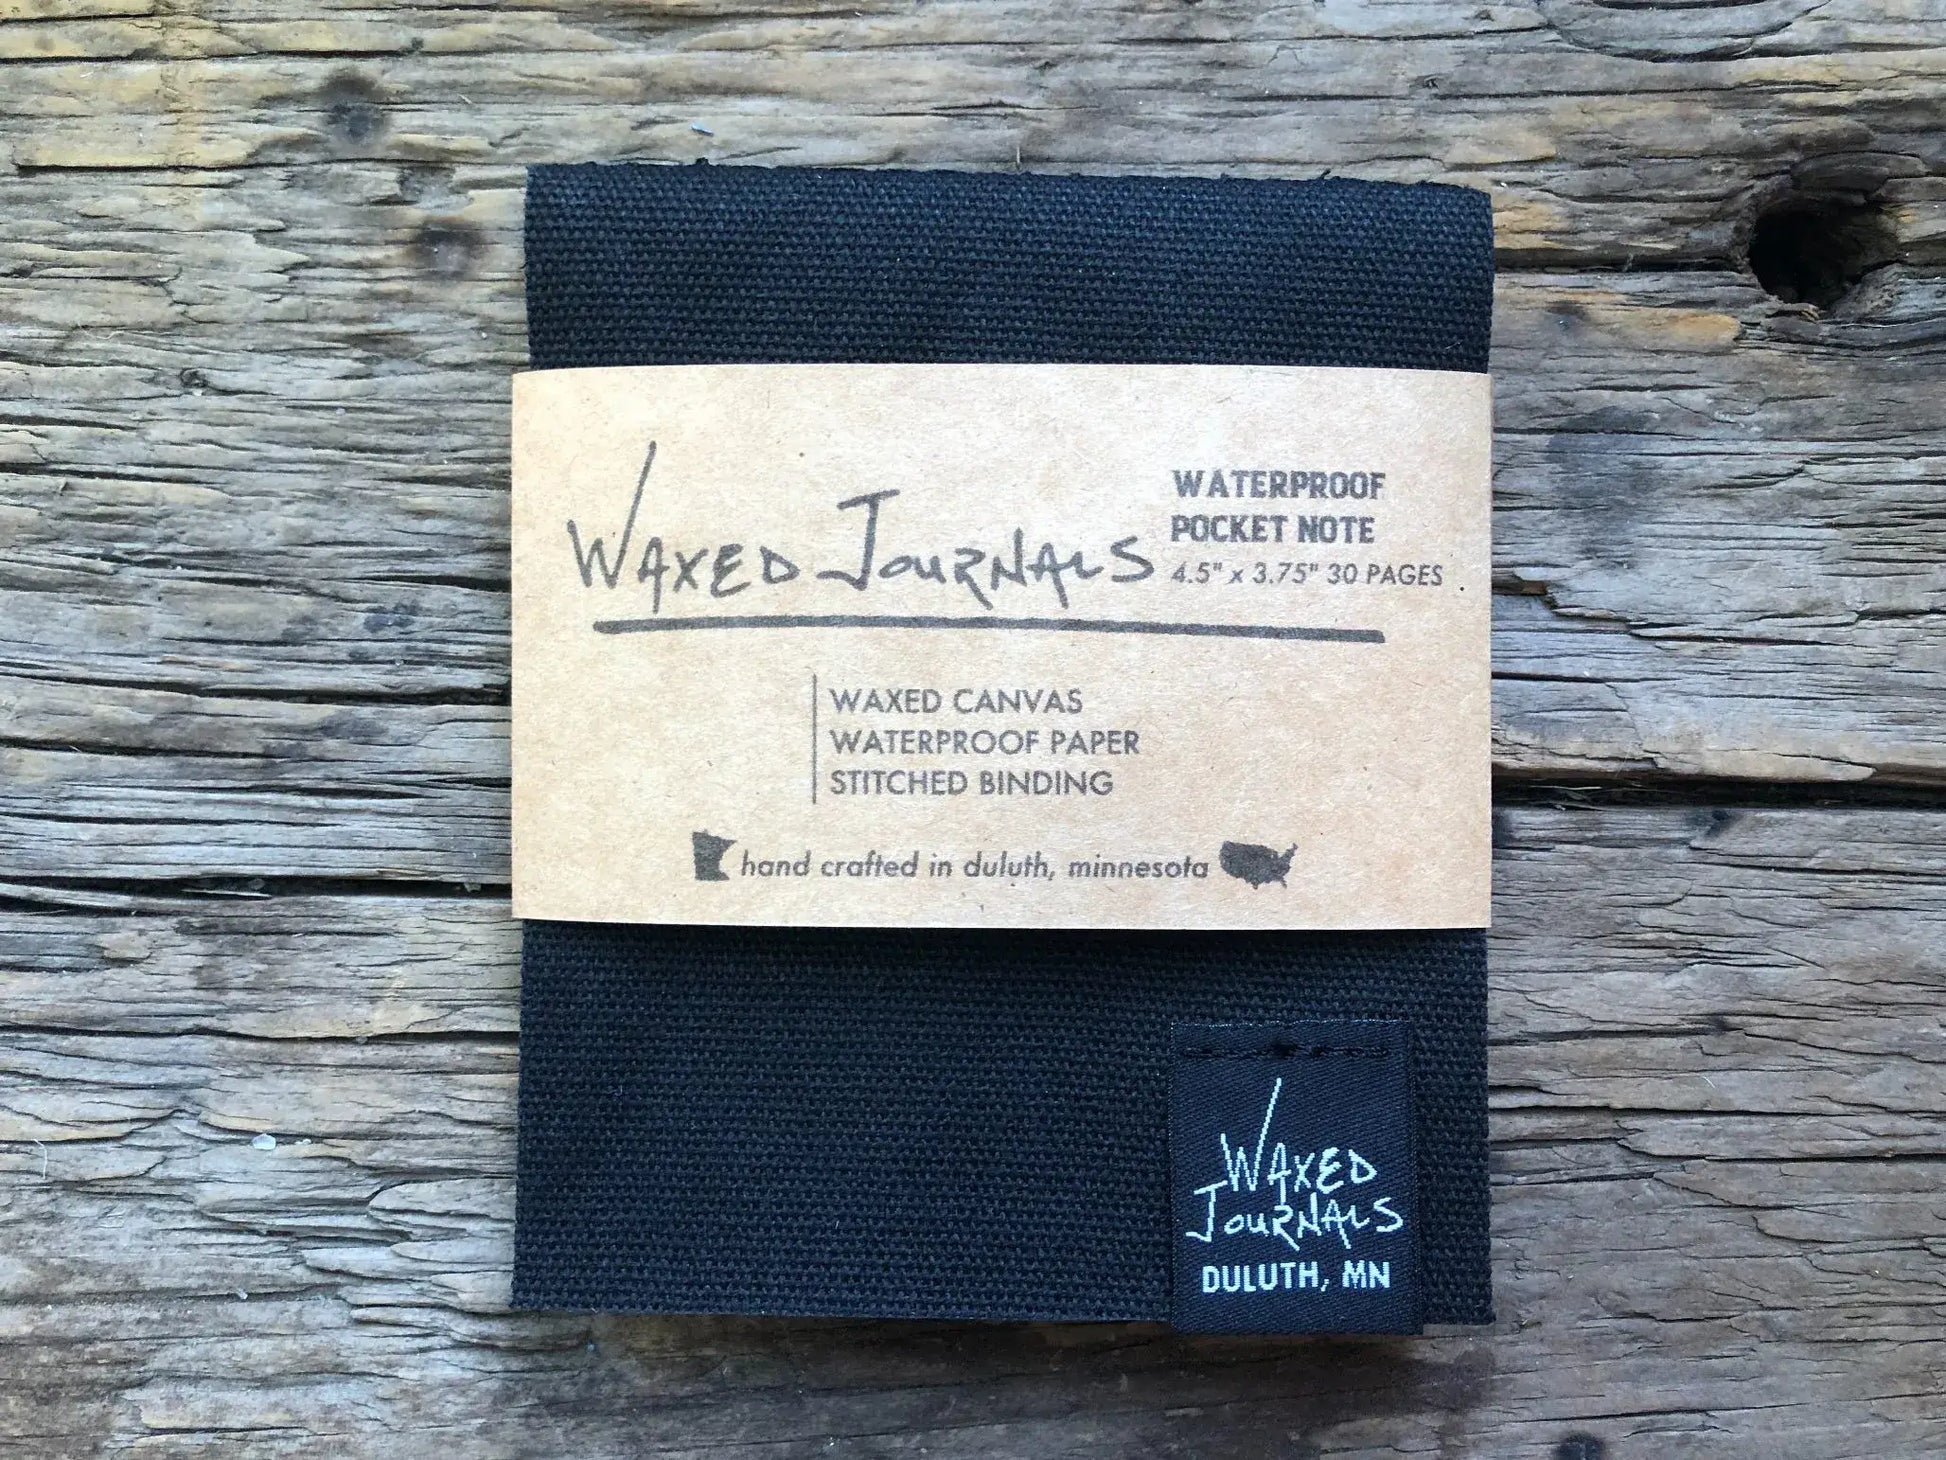 Black waxed journal notepad in packaging on wood.